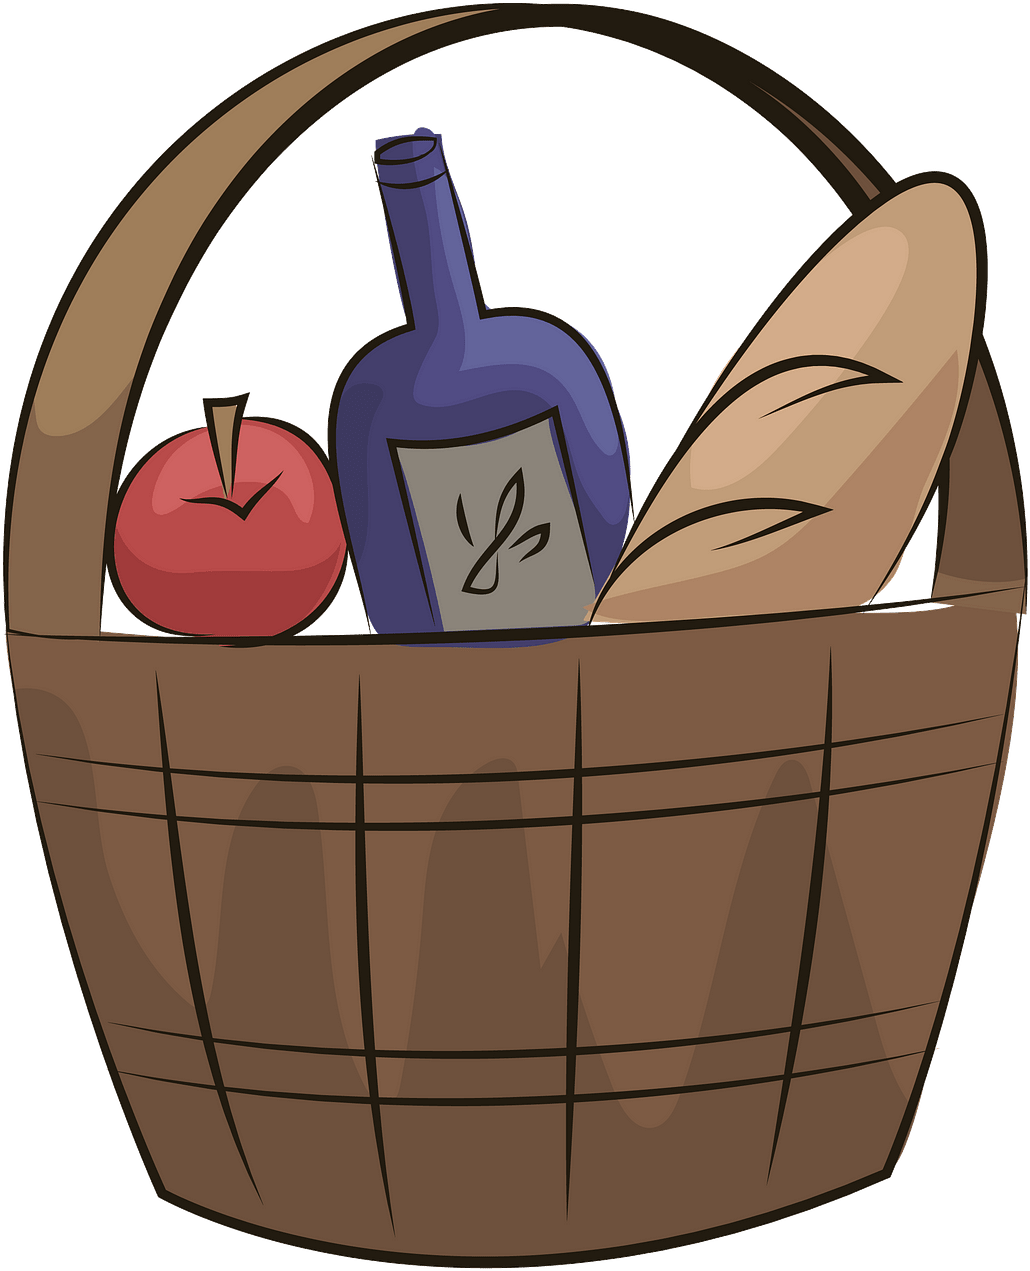 A Basket With Food And A Bottle